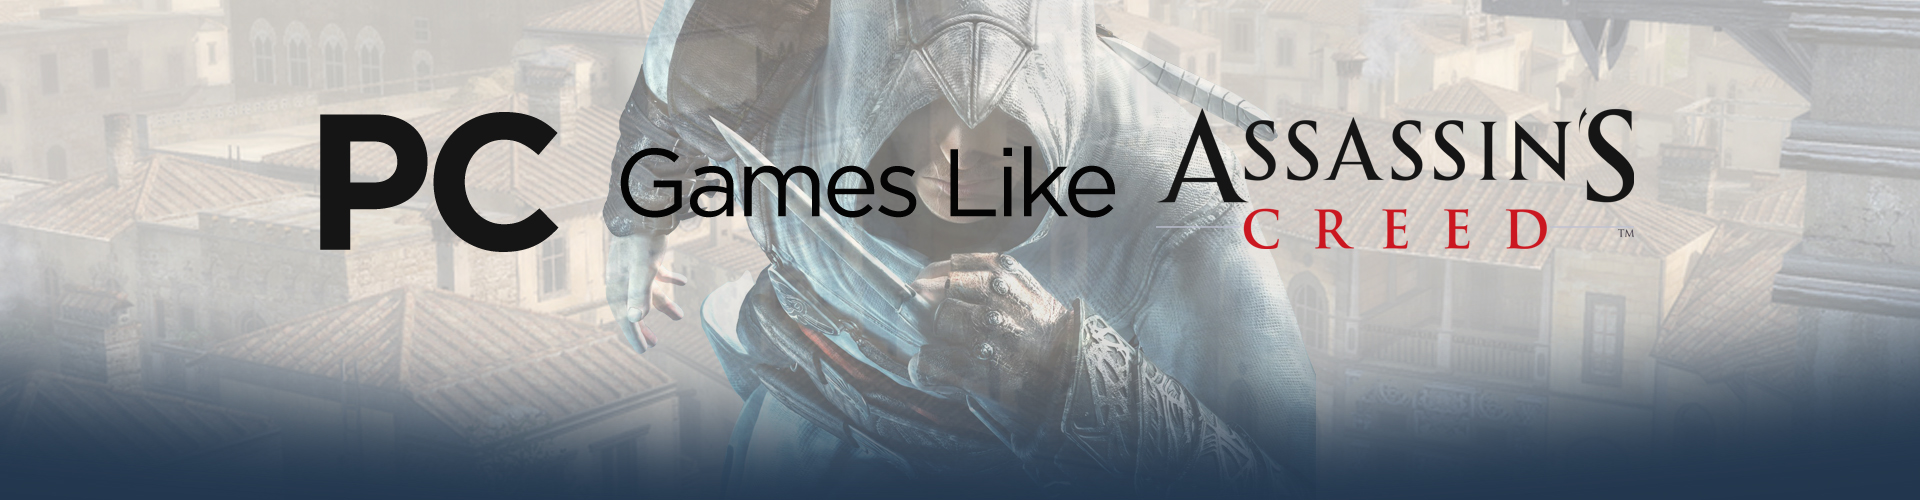 Jeux PC comme Assassin's Creed